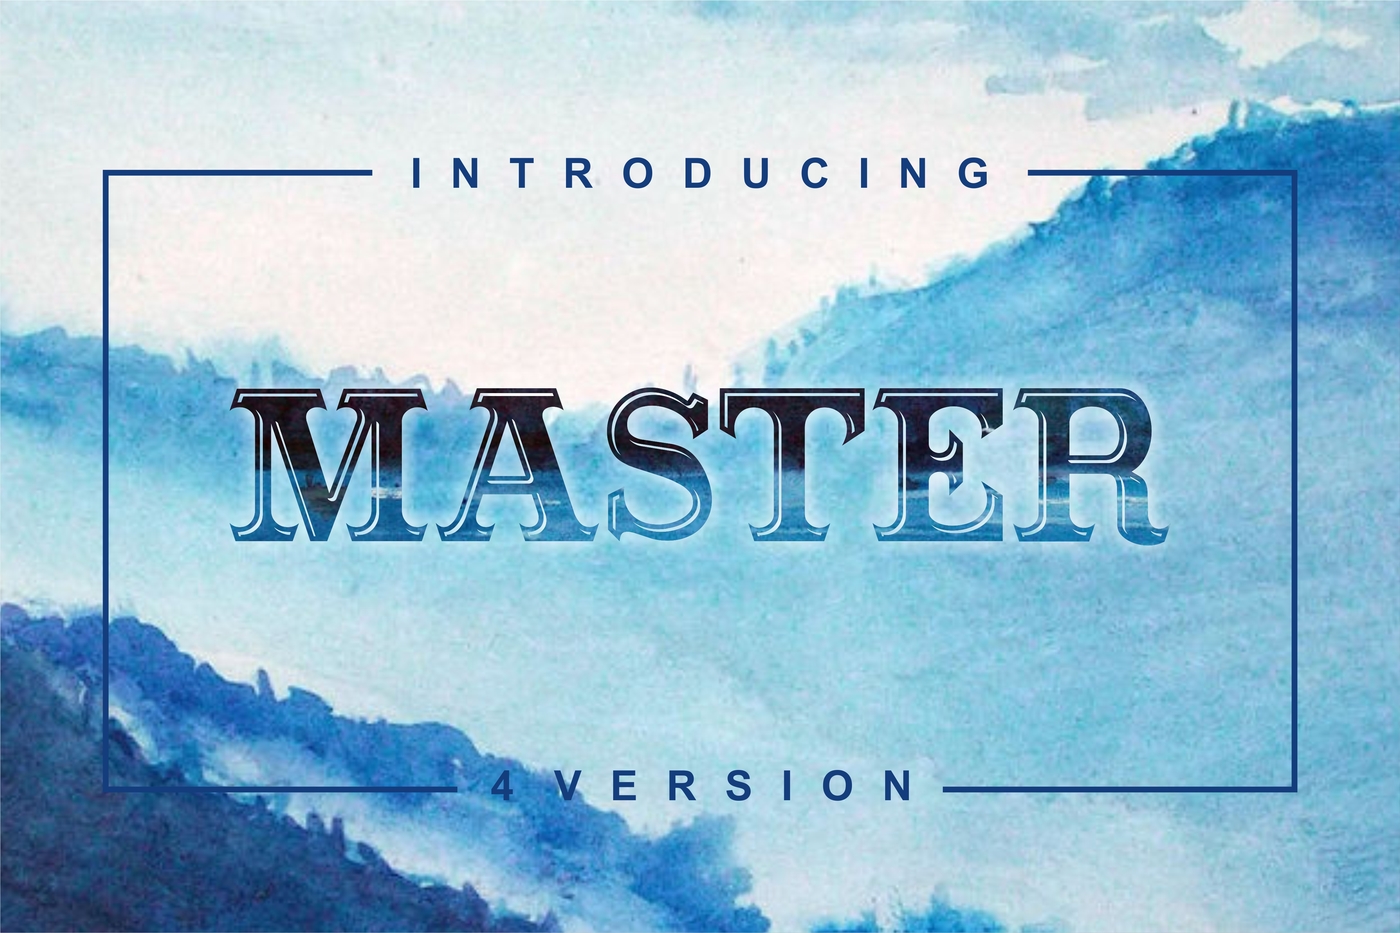 Masterpiece - serif font in 4 versions 